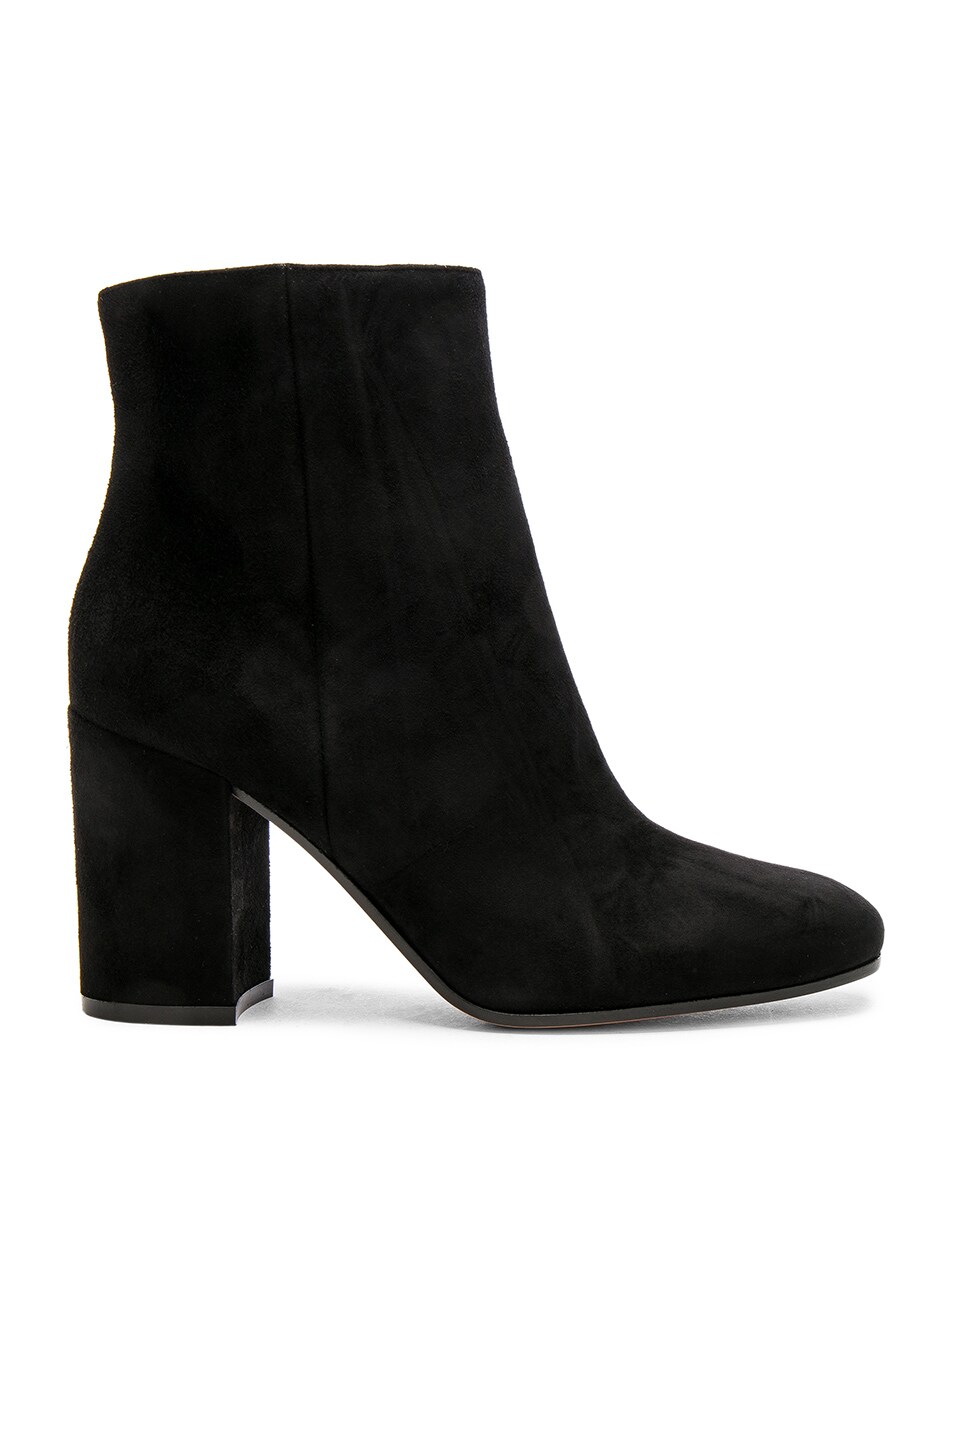 Image 1 of Gianvito Rossi Suede Rolling Booties in Black